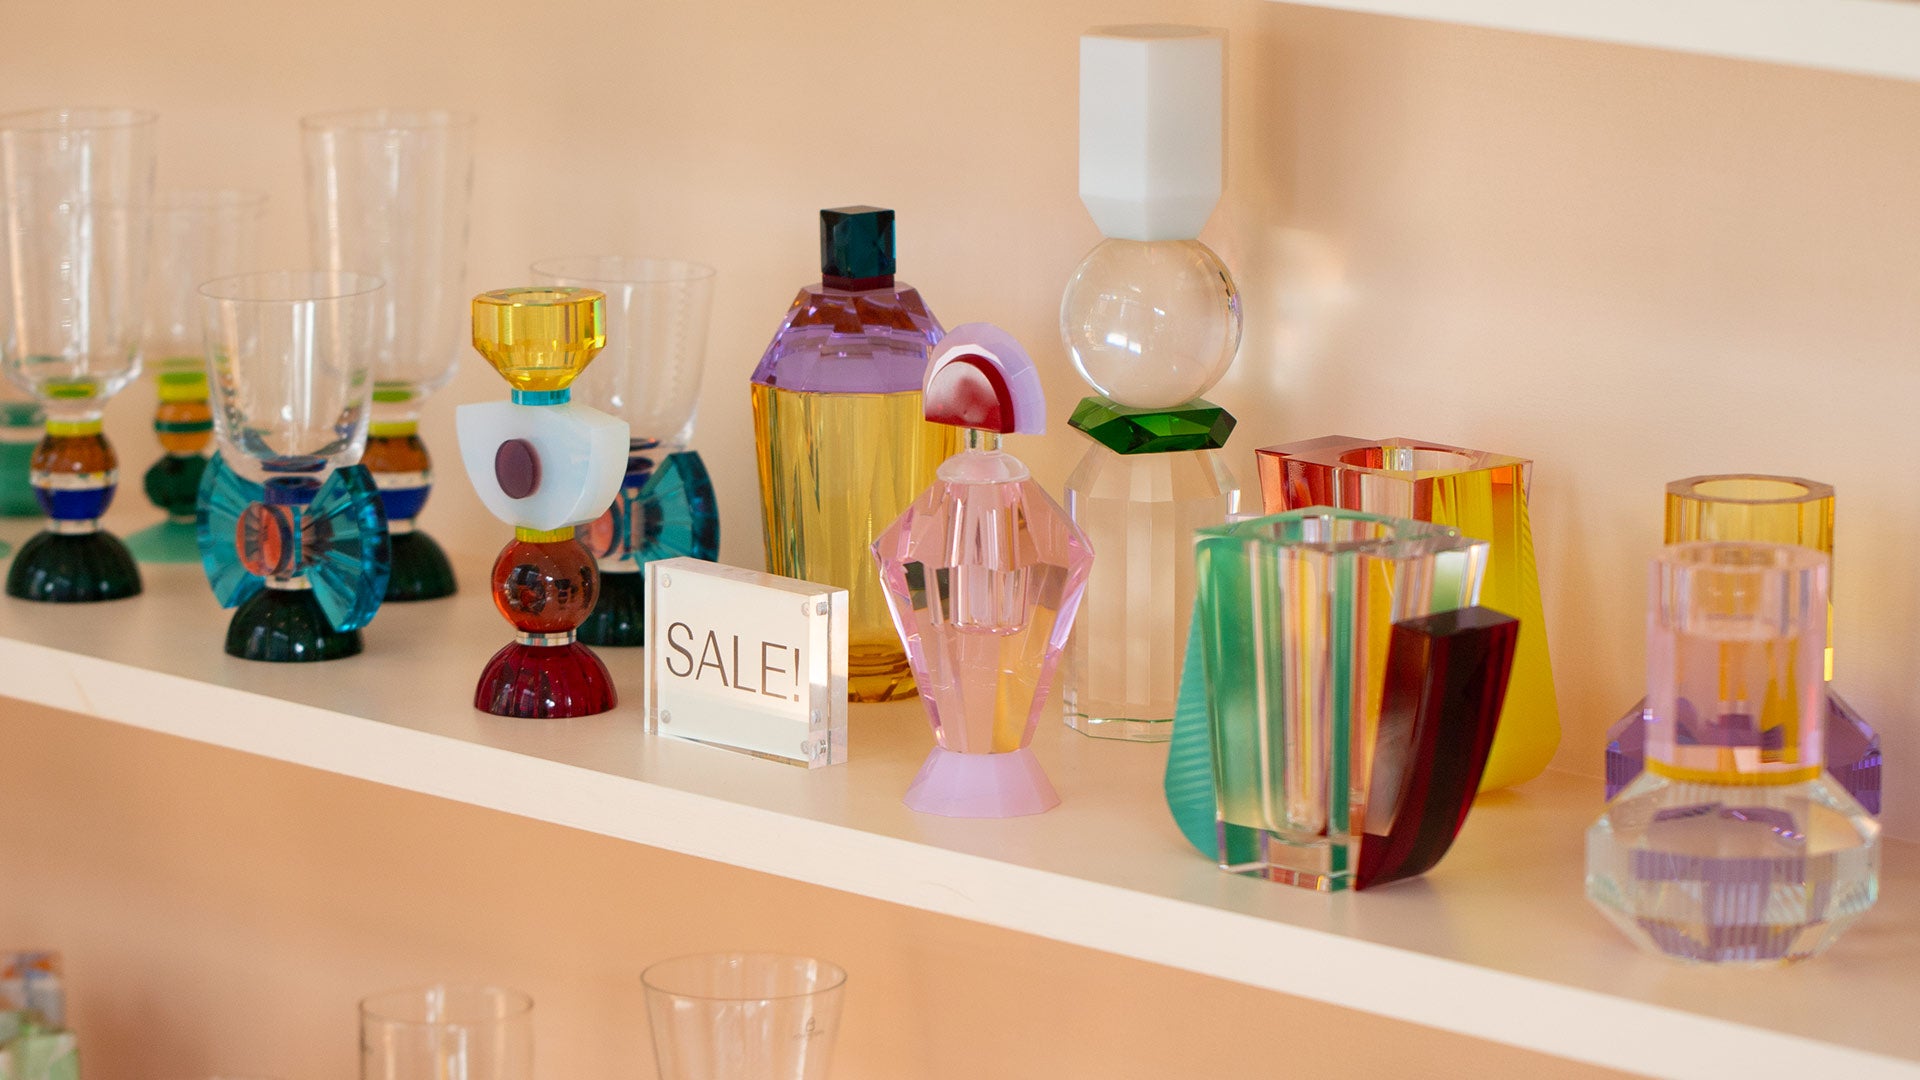 Mociun store interior shelf with "Sale!" sign, showcasing colorful glassware, mixed decor and fine crystal objects.